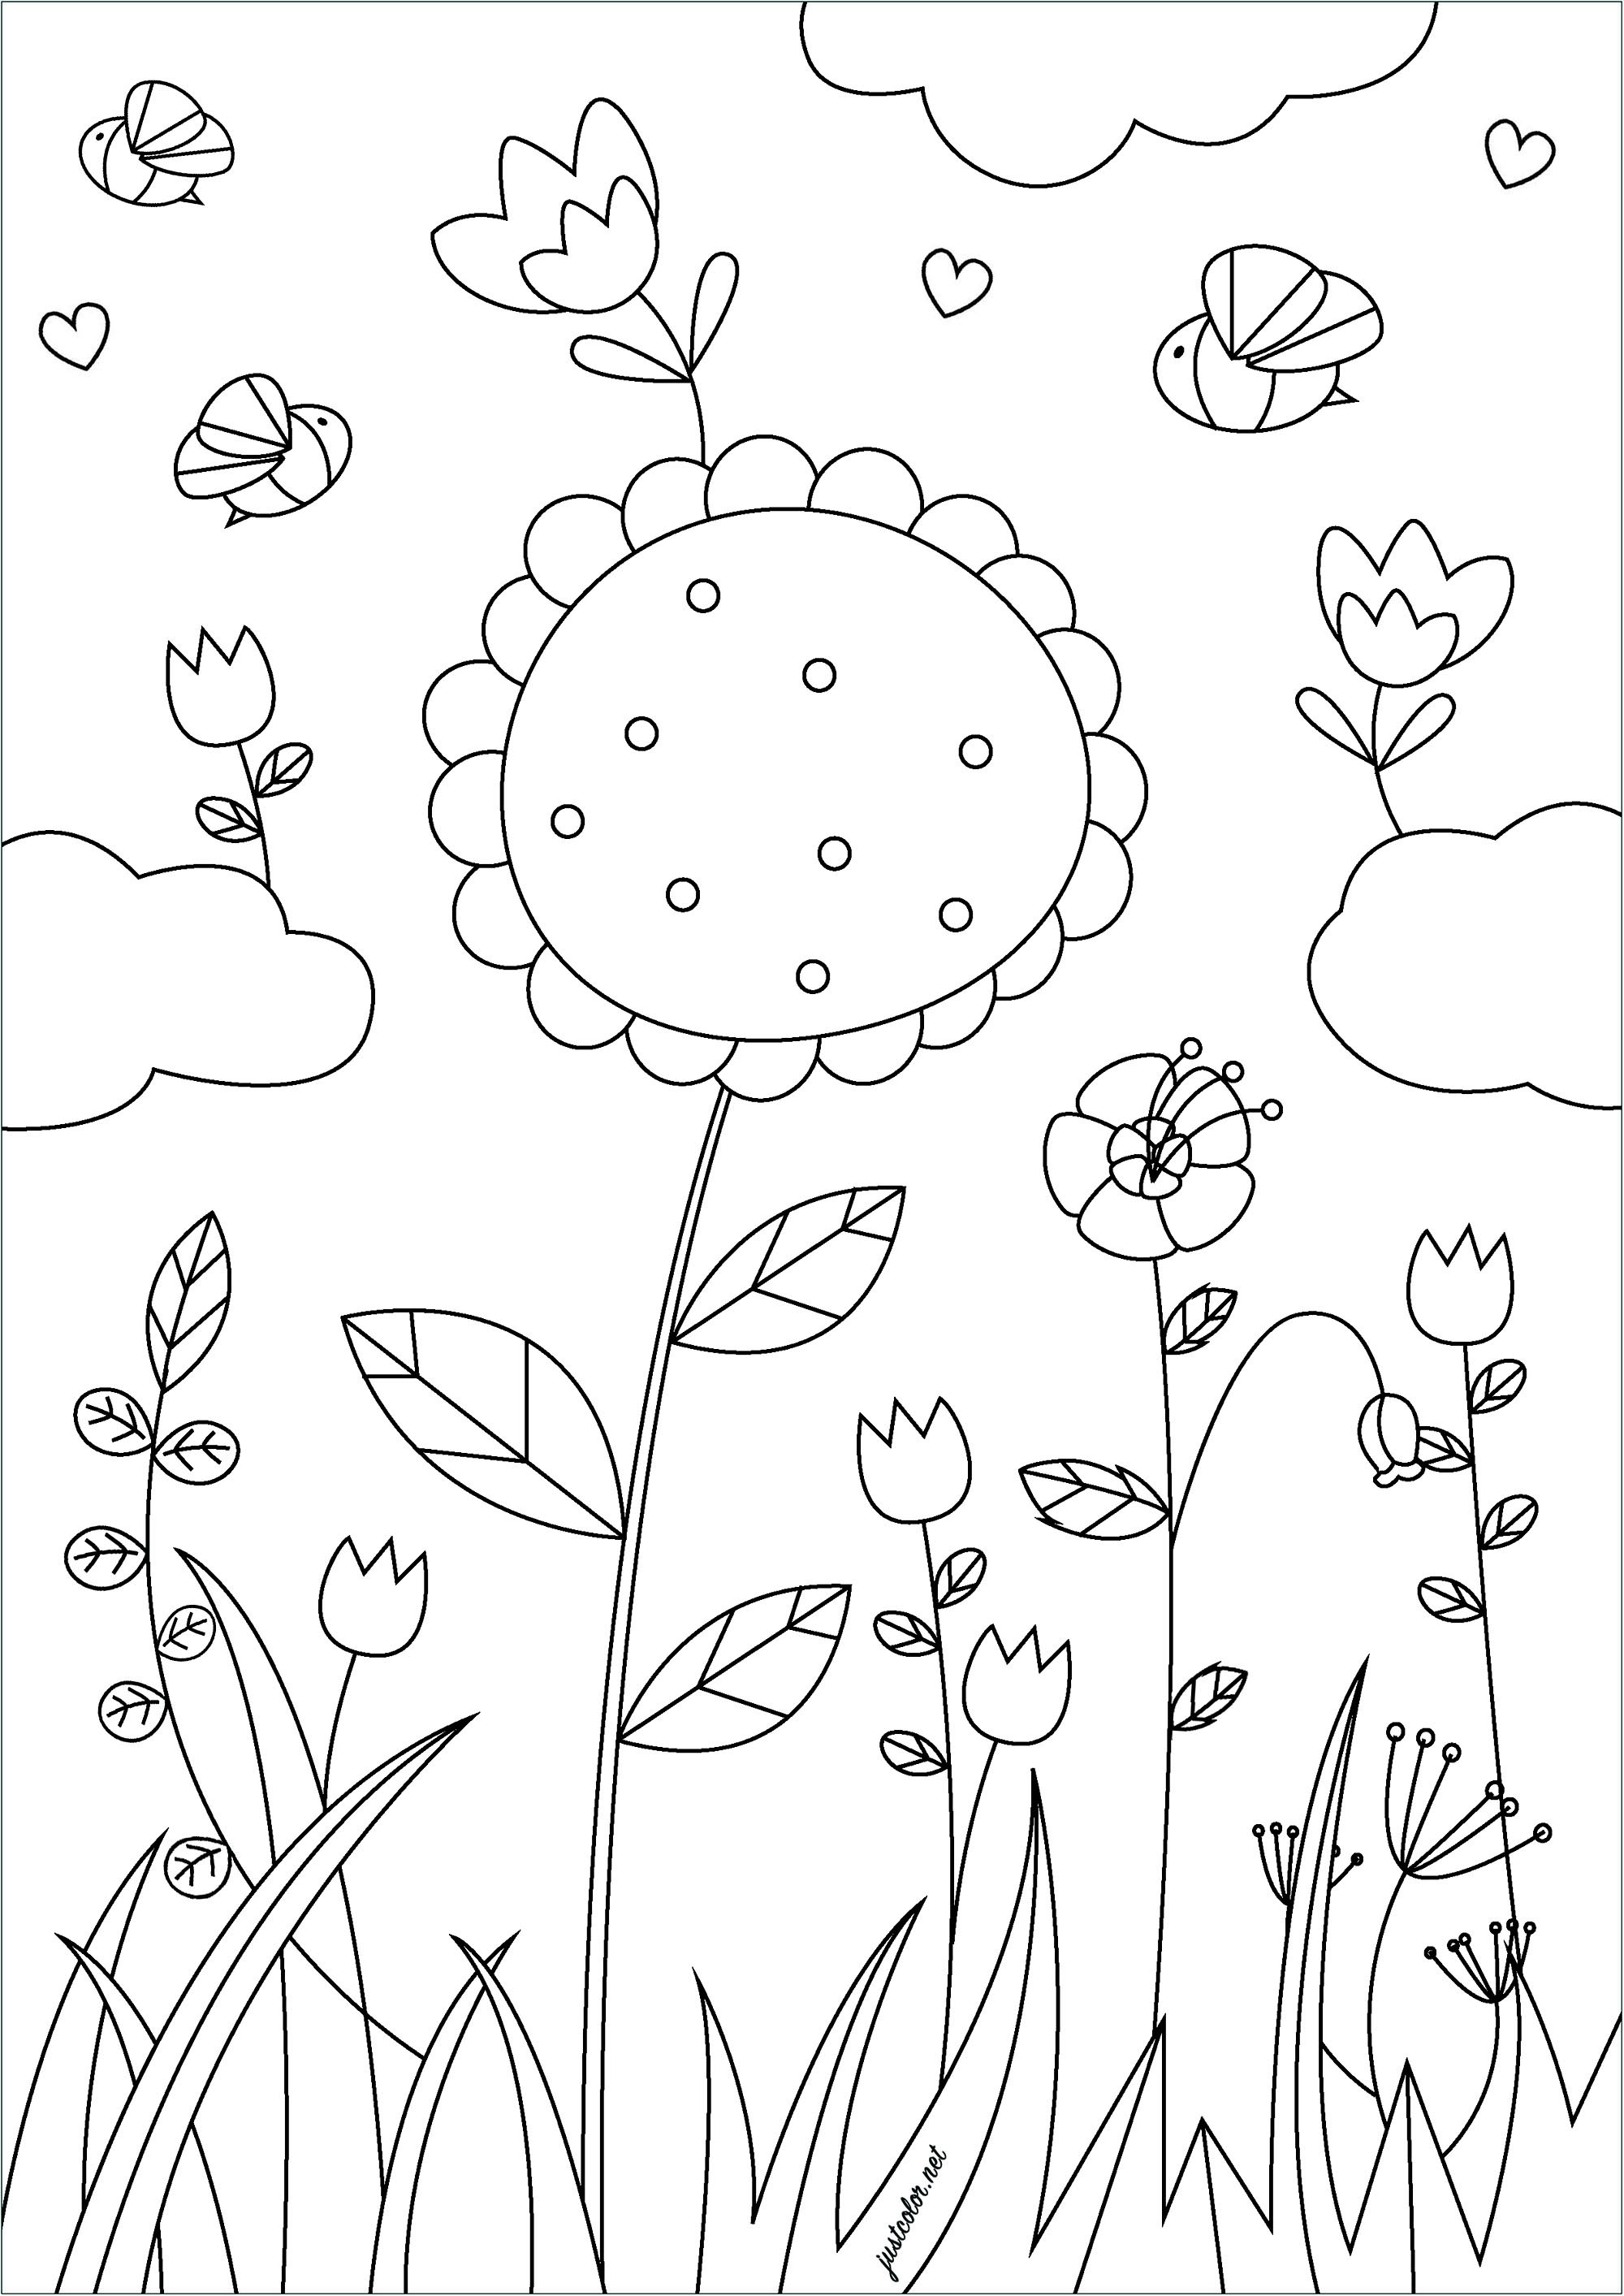 Pretty flowers in the wind. This coloring page called 'Spring Flowers' features several flowers blooming in a field of greenery.